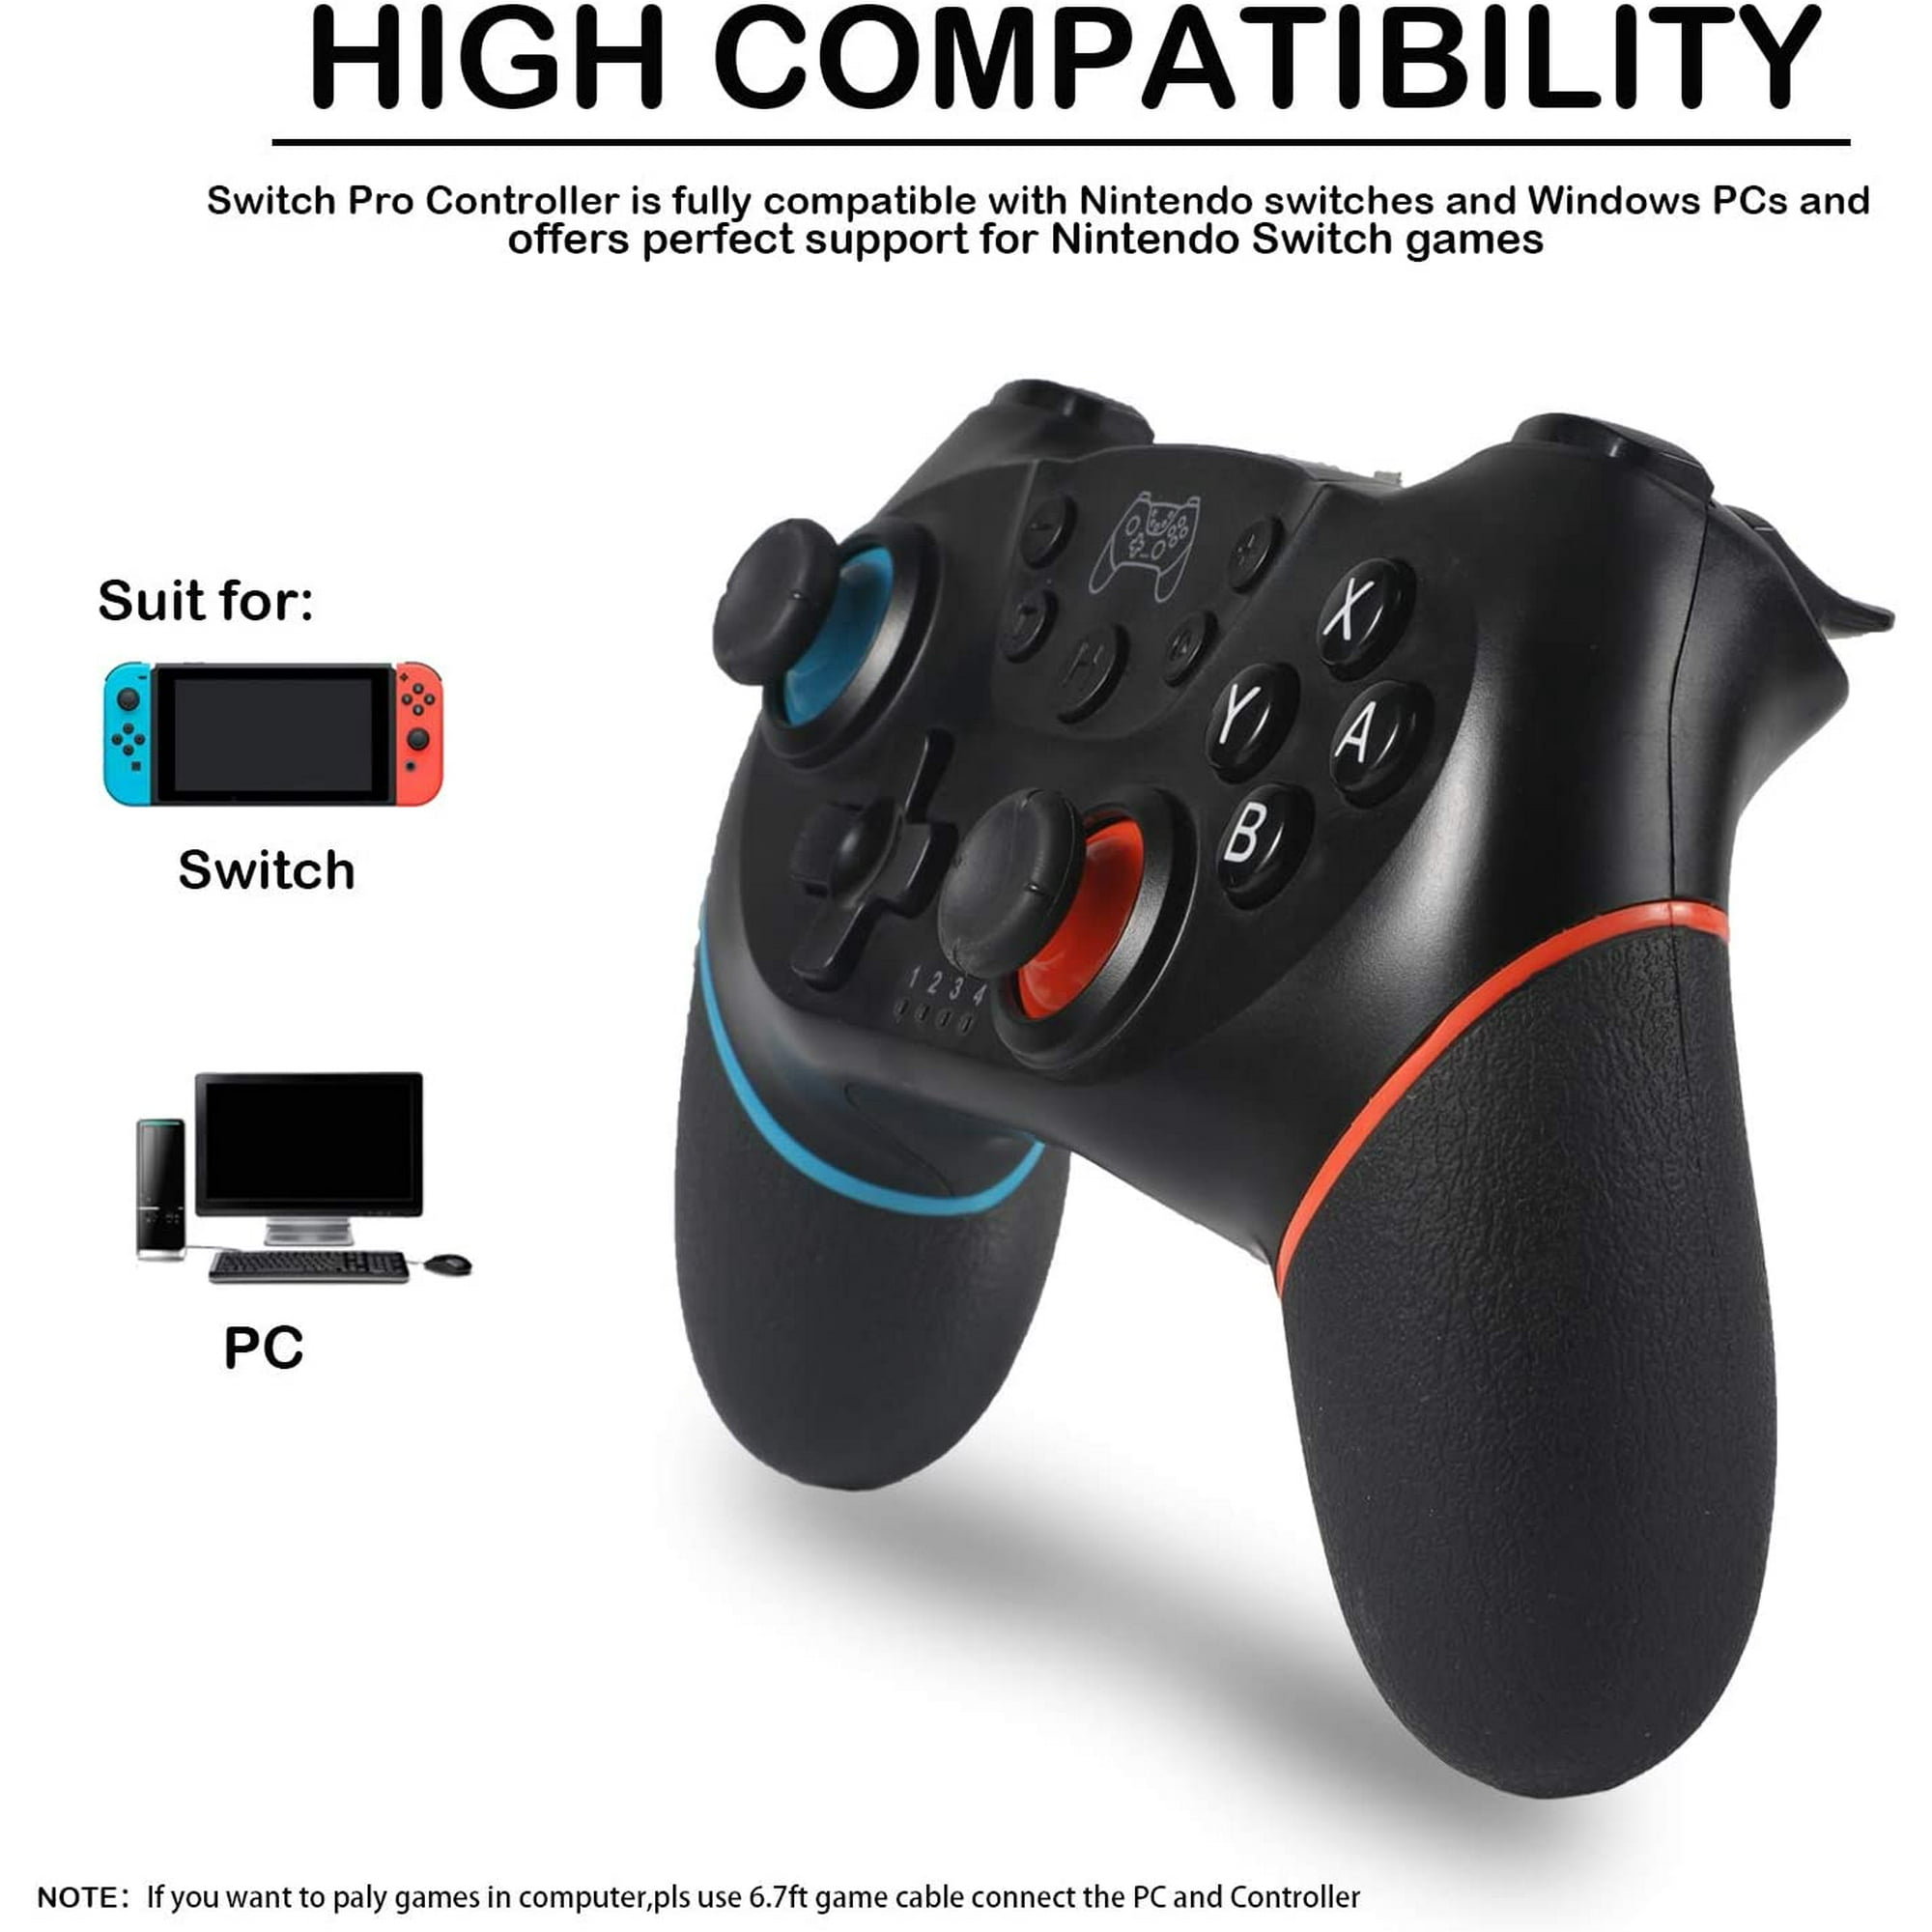 Wireless Pro Controller For Nintendo Switch Sefitopher Bluetooth Switch Pro Controller Gampad Joypad Pc Controller Walmart Canada